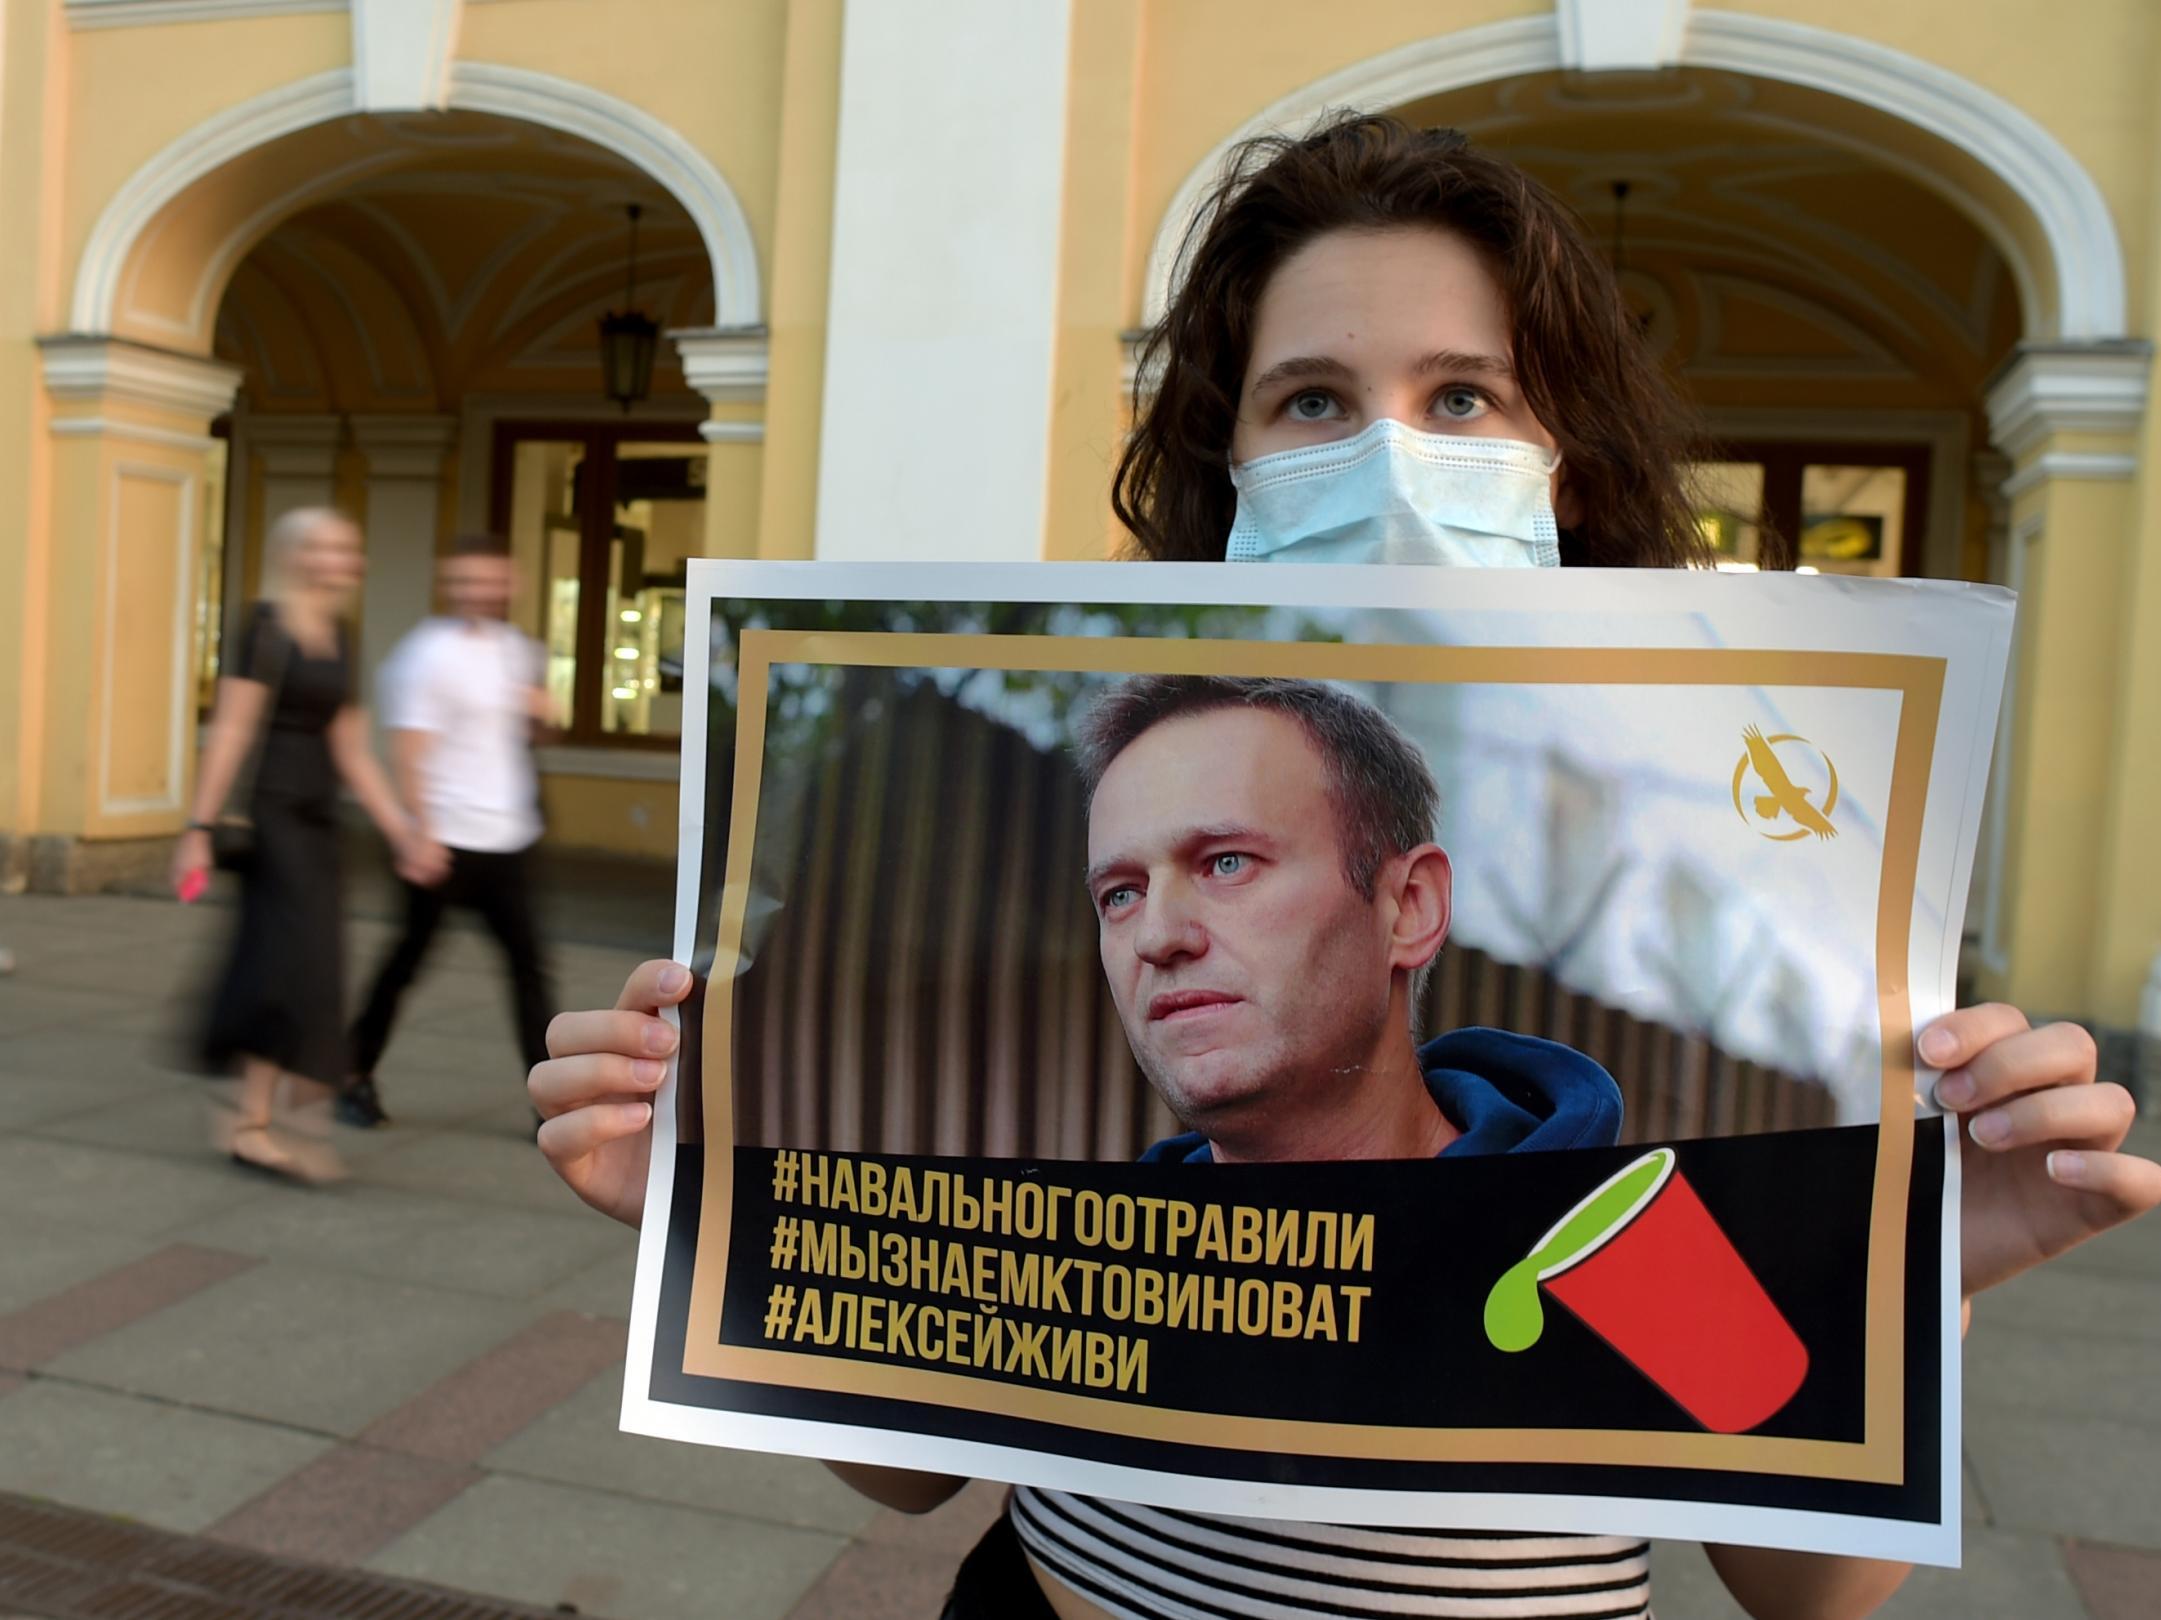 A woman holding a placard with an image of Navalny expresses support for the opposition leader after he was rushed to intensive care in Siberia